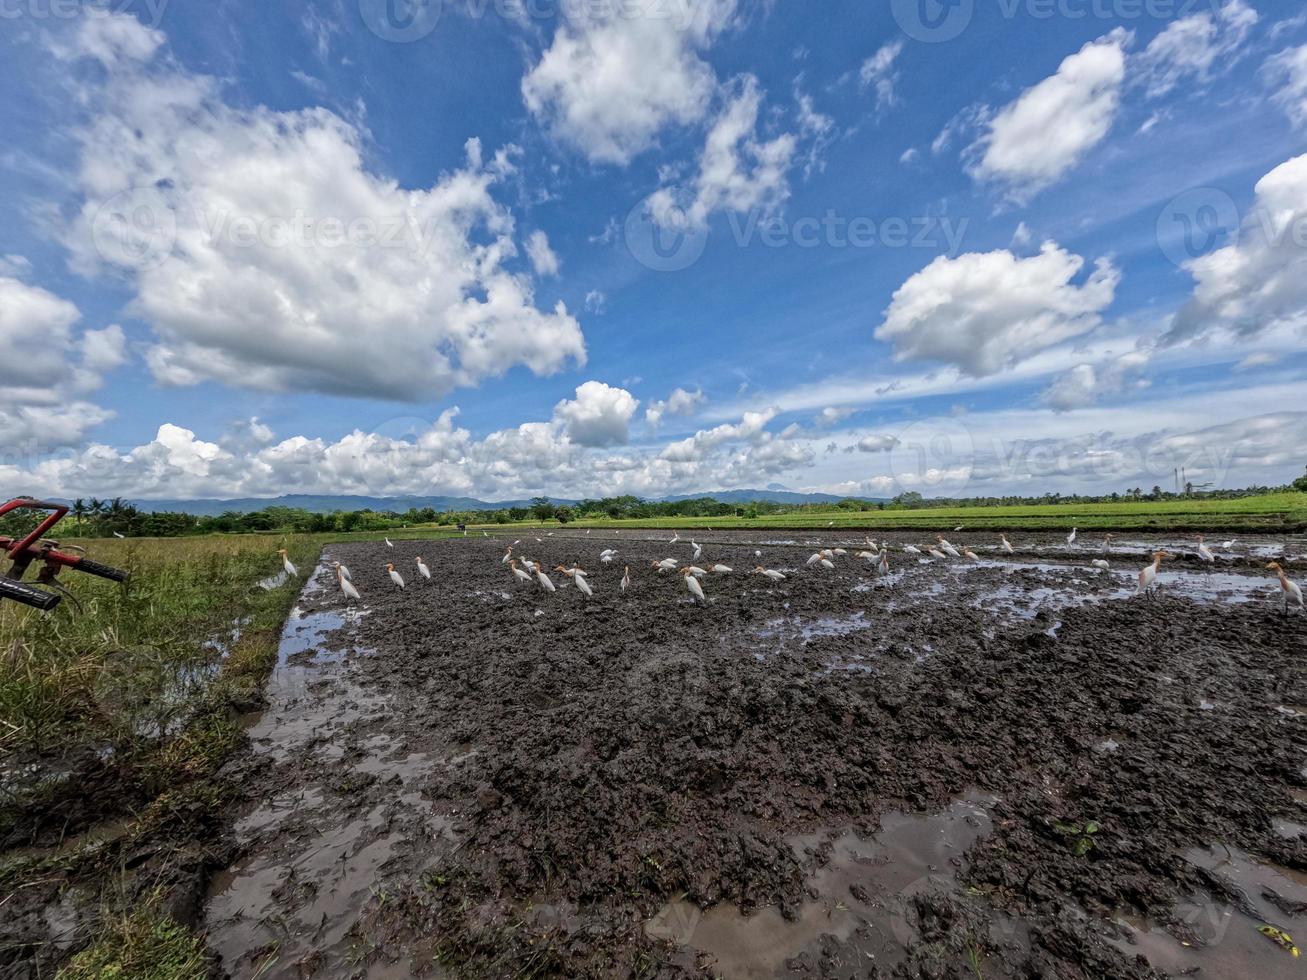 A flock of herons are looking for food in a rice field that is being processed for planting, a new protected habitat for wild birds photo